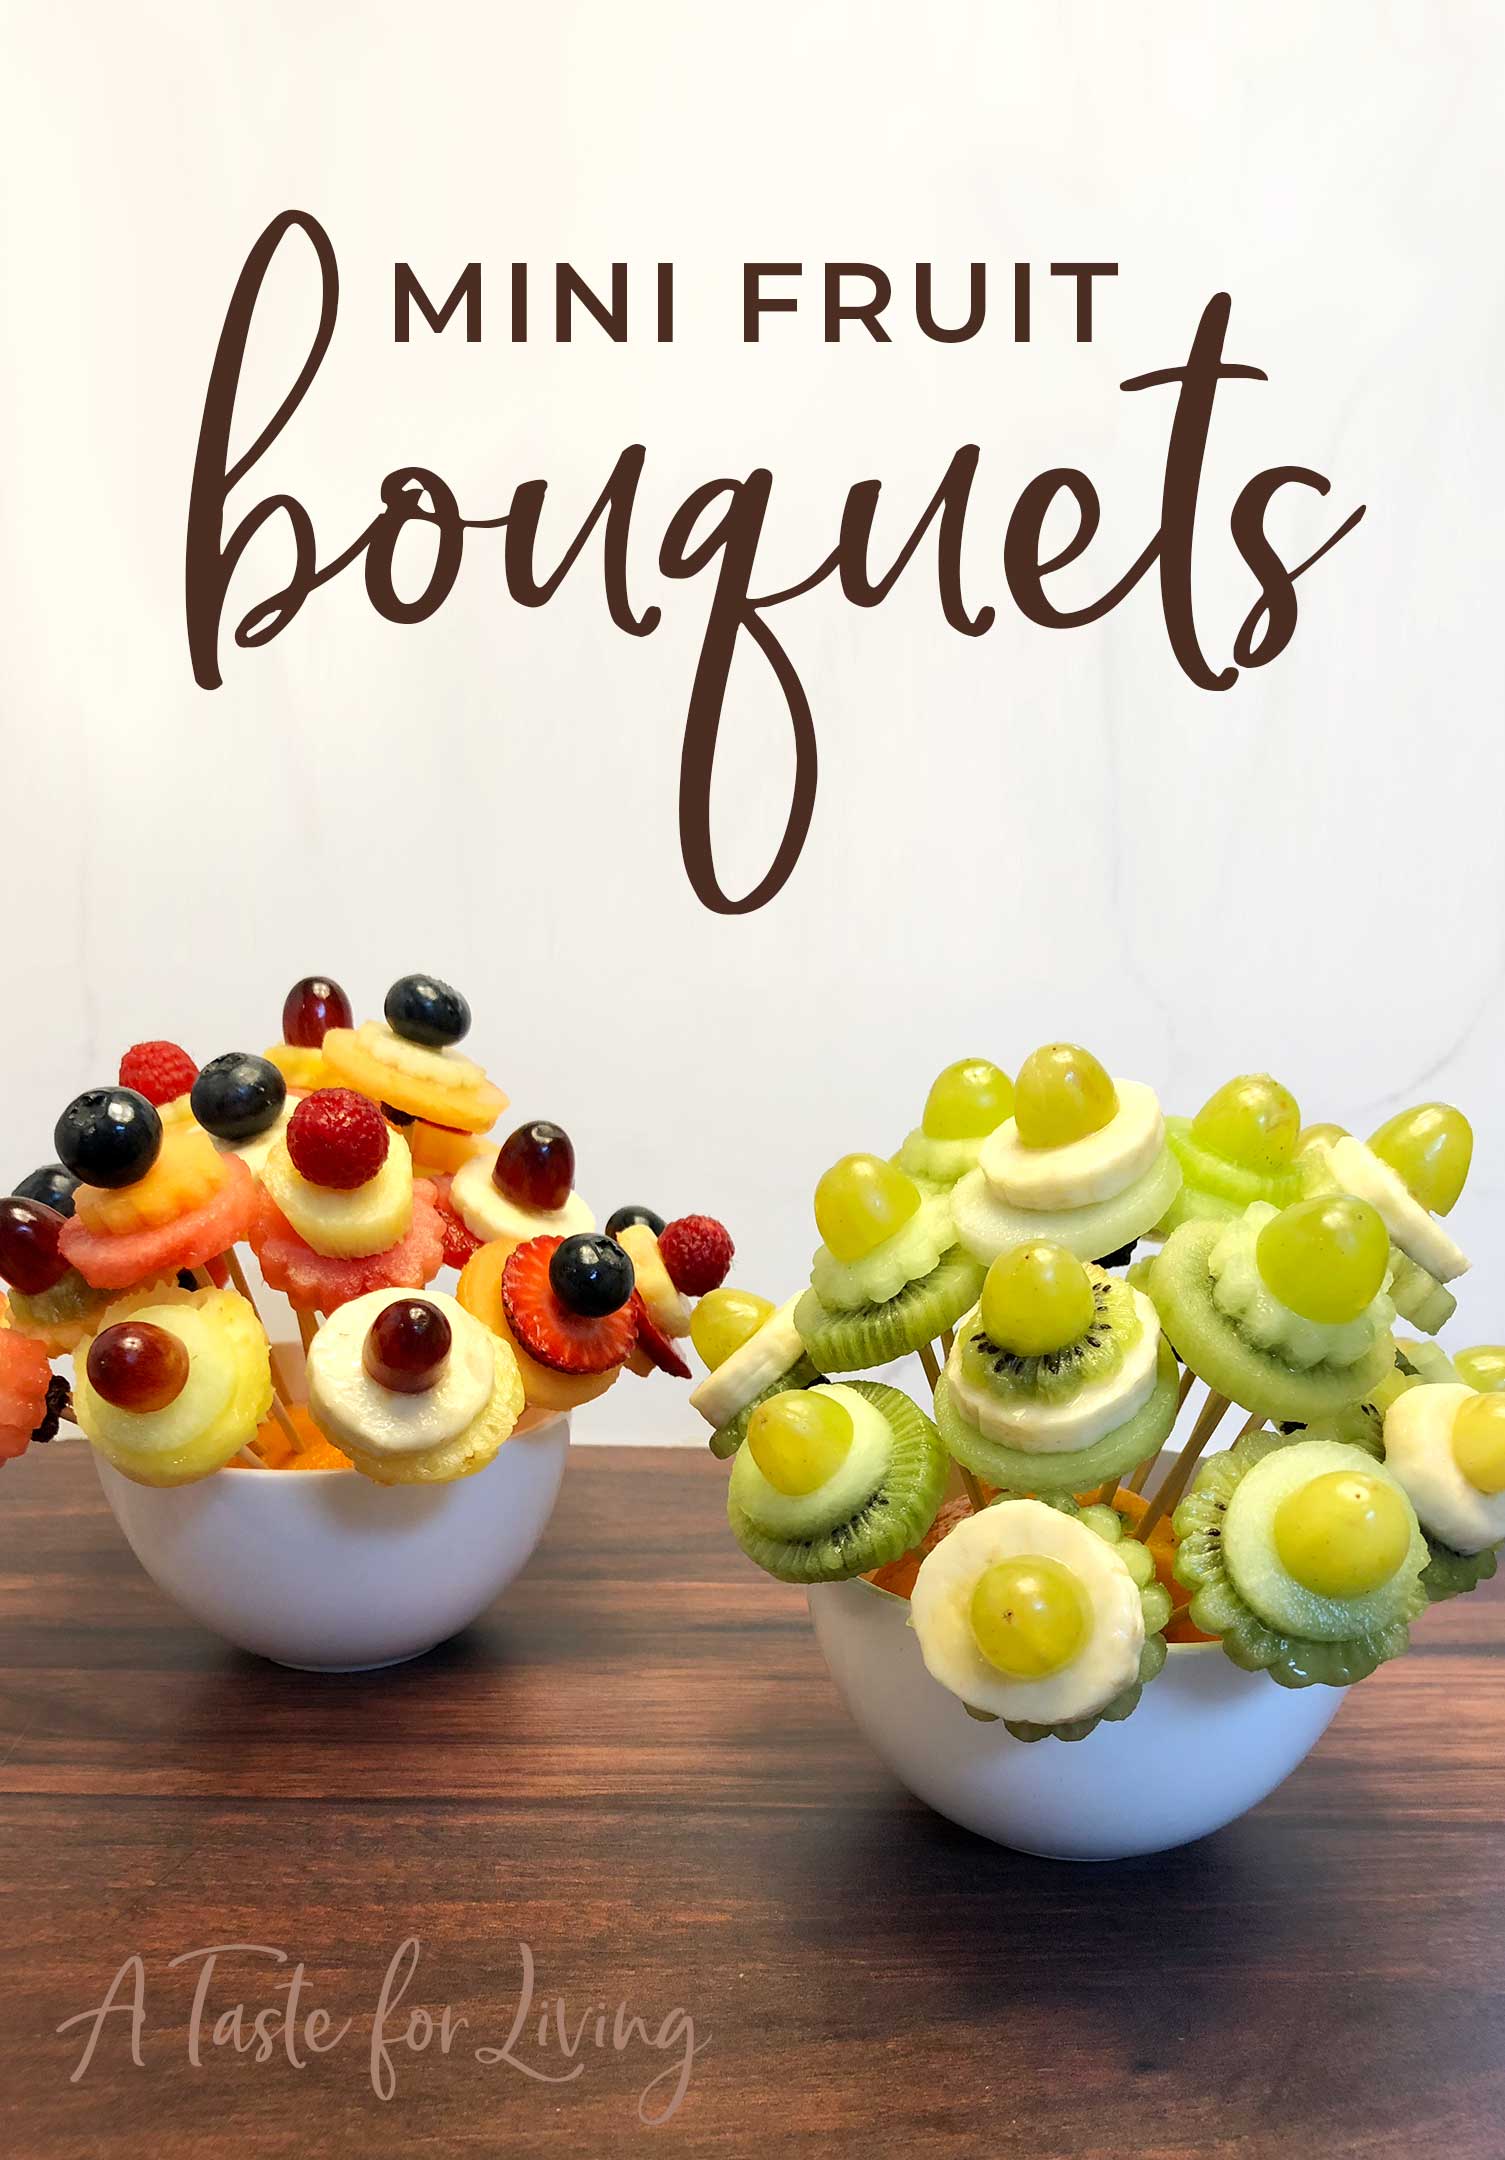 How to Make Mini Fresh Fruit Bouquets by A Taste for Living